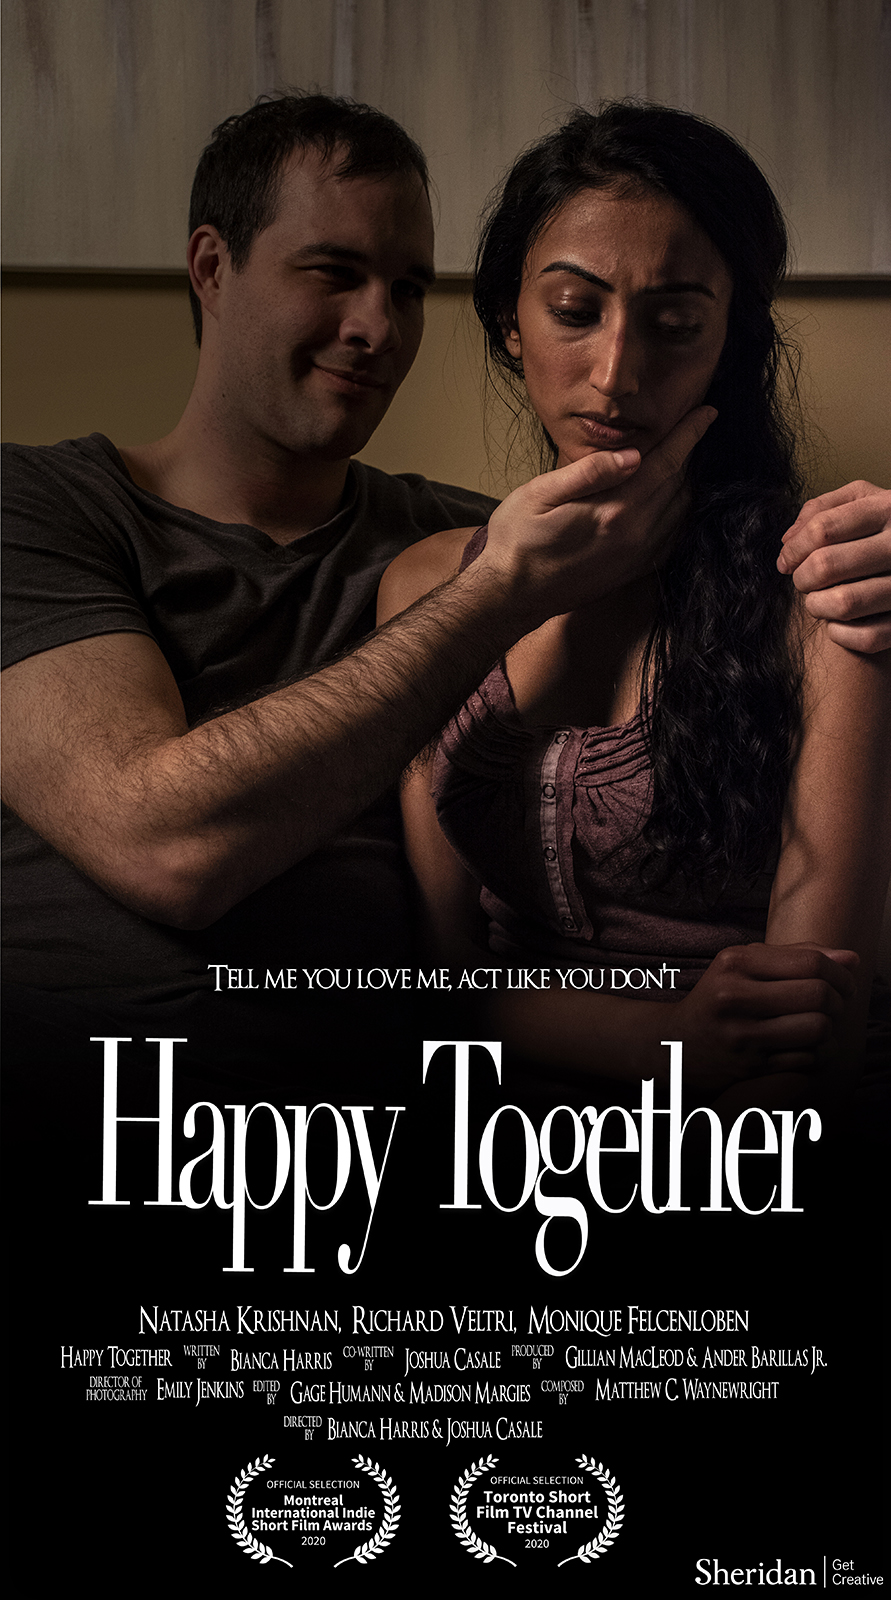 Taking on the tough subject of domestic abuse, directors Bianca Harris and Joshua Casale are bringing student filmmakers together for 'Happy Together'.